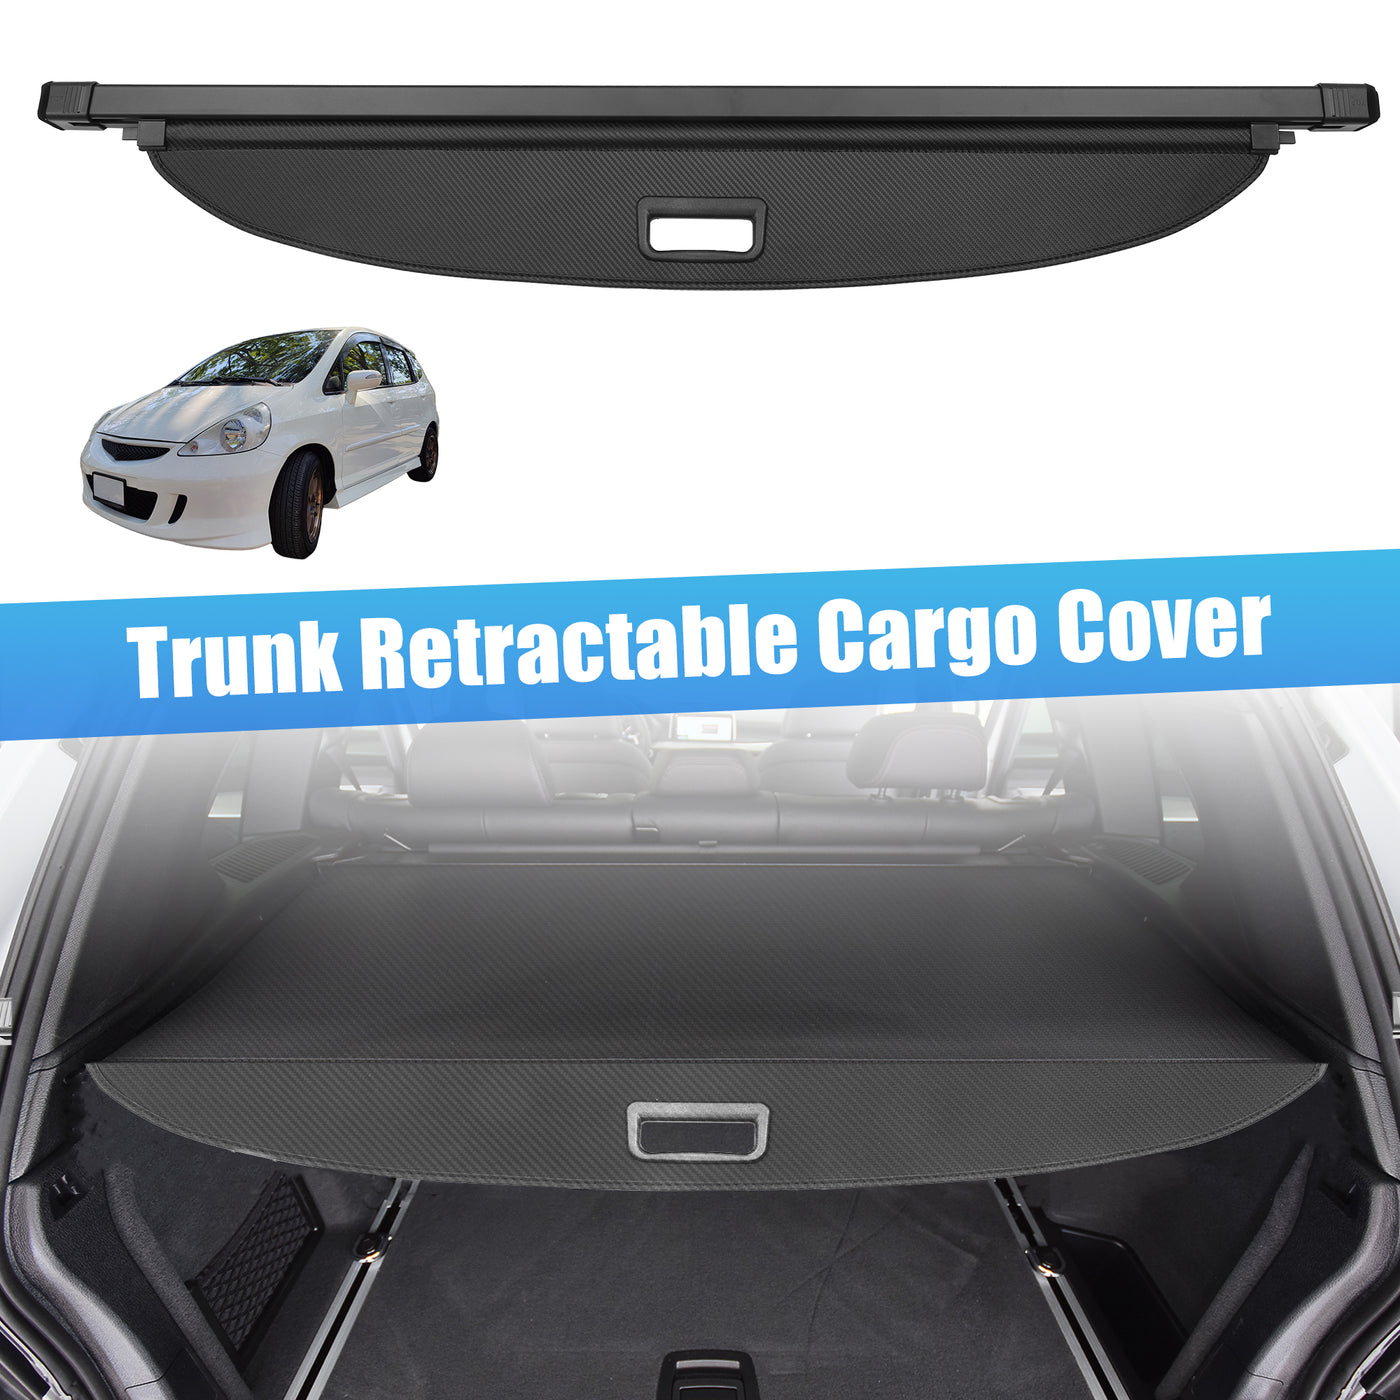 ACROPIX Retractable Cargo Cover Rear Trunk Security Cover Shield Shade Adjustable Fit for Honda Fit 2002-2007 - Pack of 1